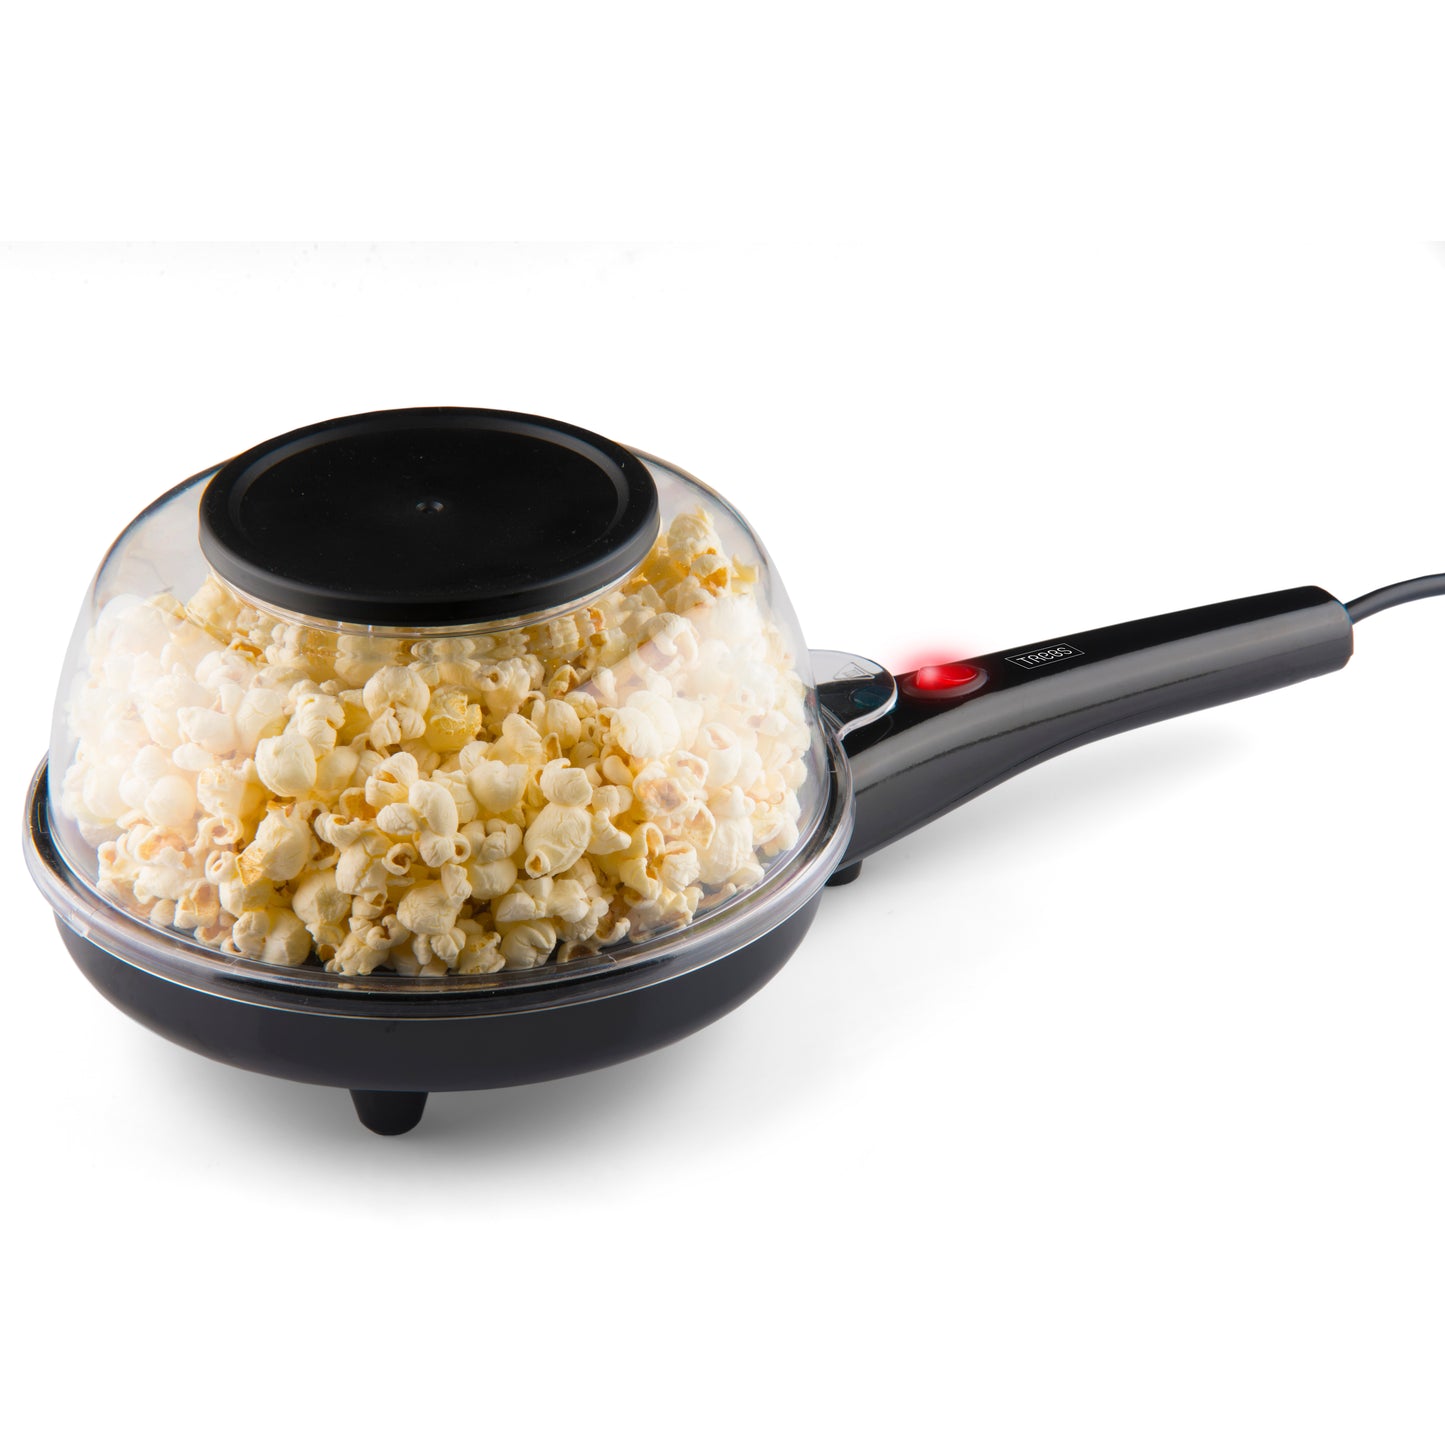 Trebs 99344 - Popcorn and Crêpe Maker in one / Comfortcook with recipes, batter divider, measuring cup and oil spoon